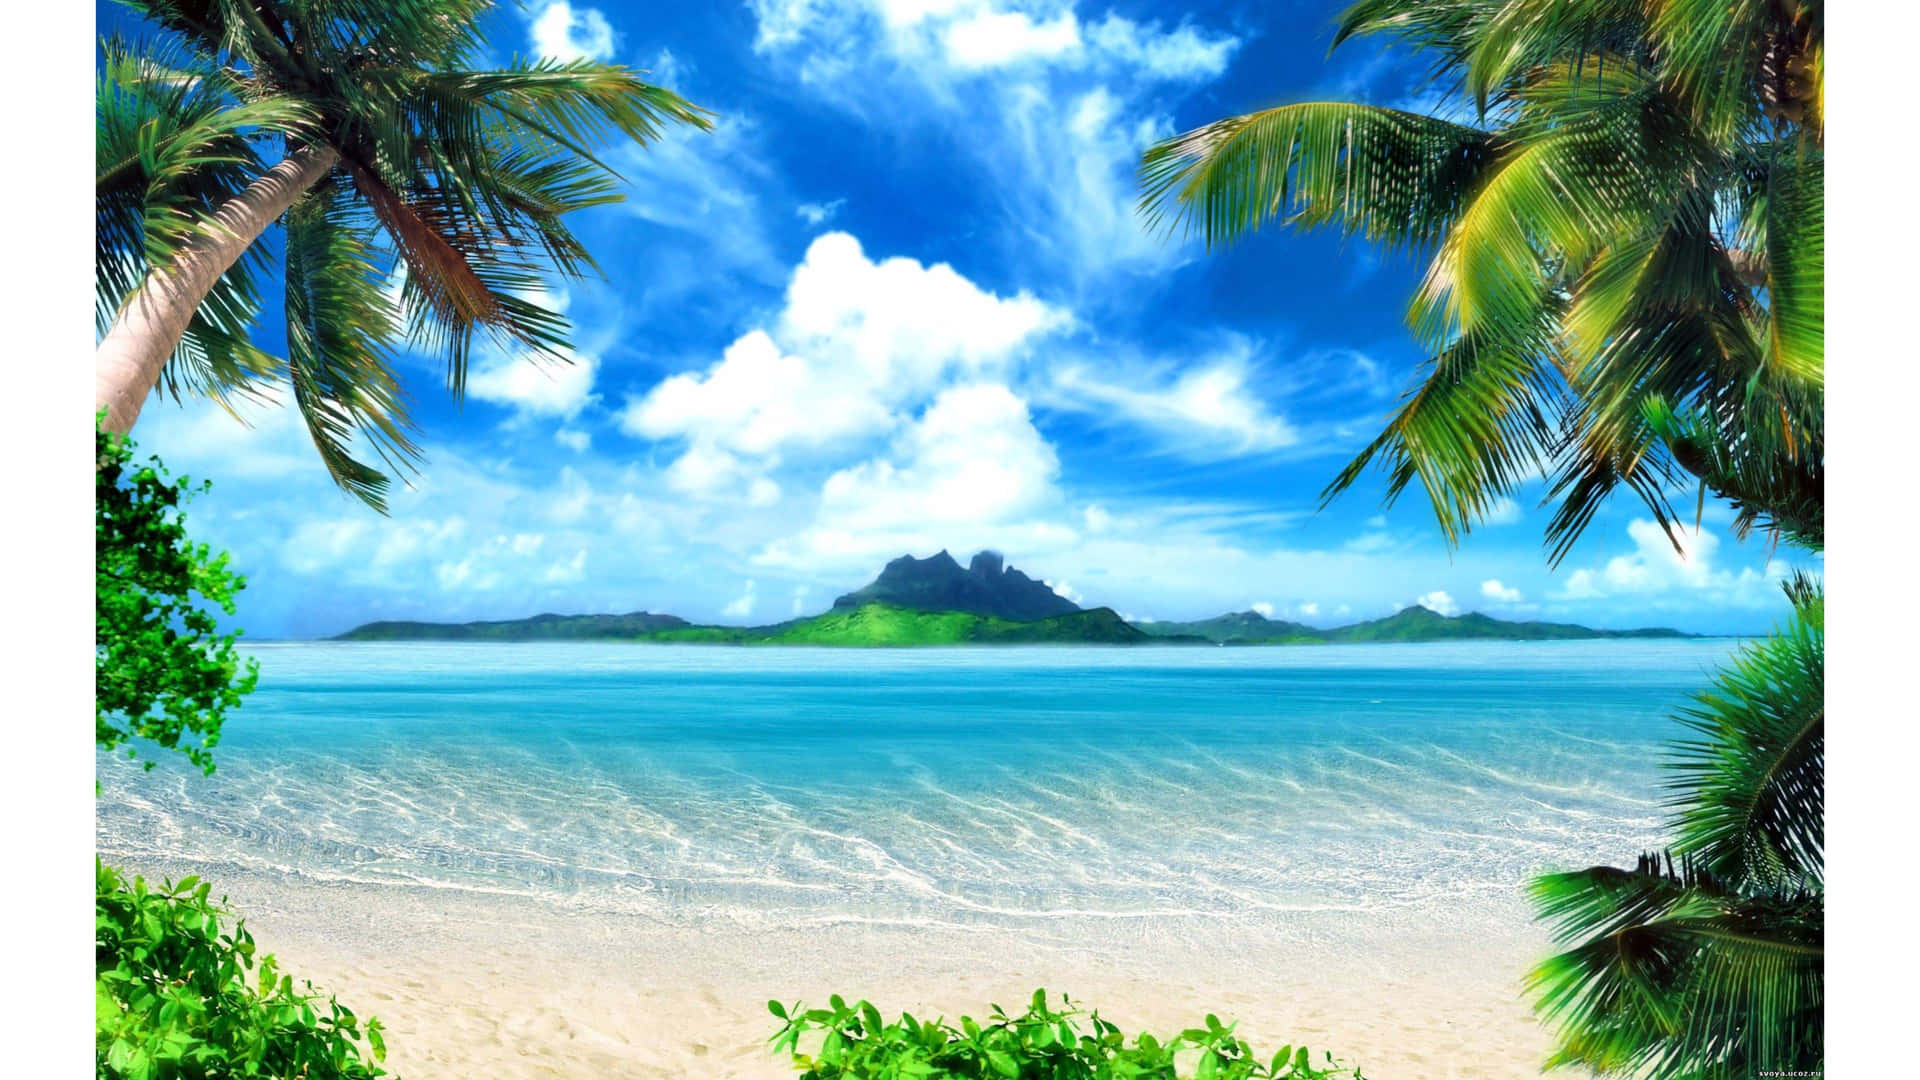 A Tropical Beach With Palm Trees And Blue Water Wallpaper